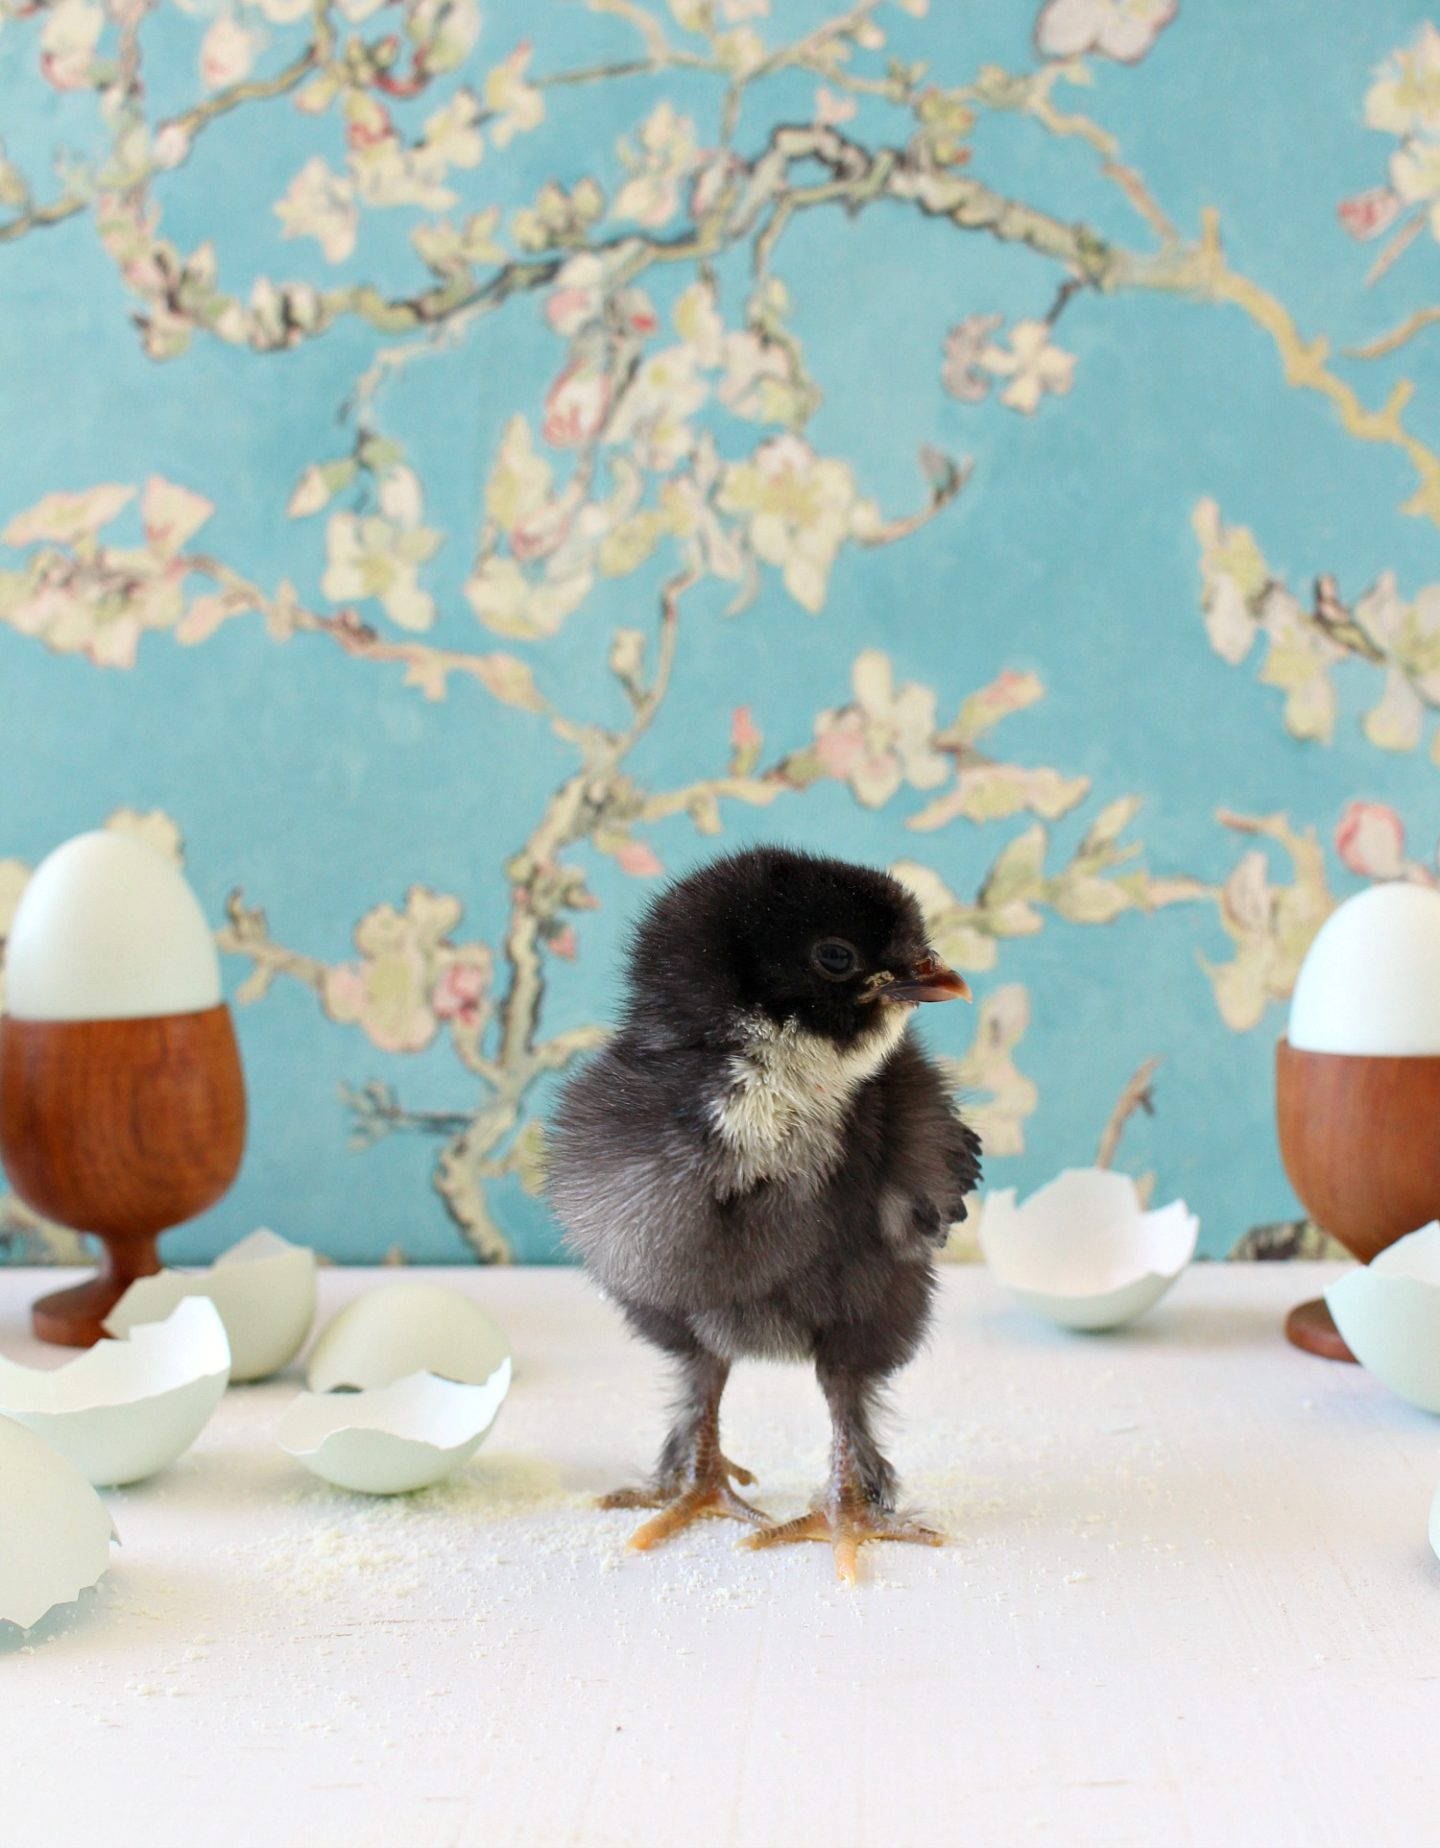 Photos of Baby Chickens